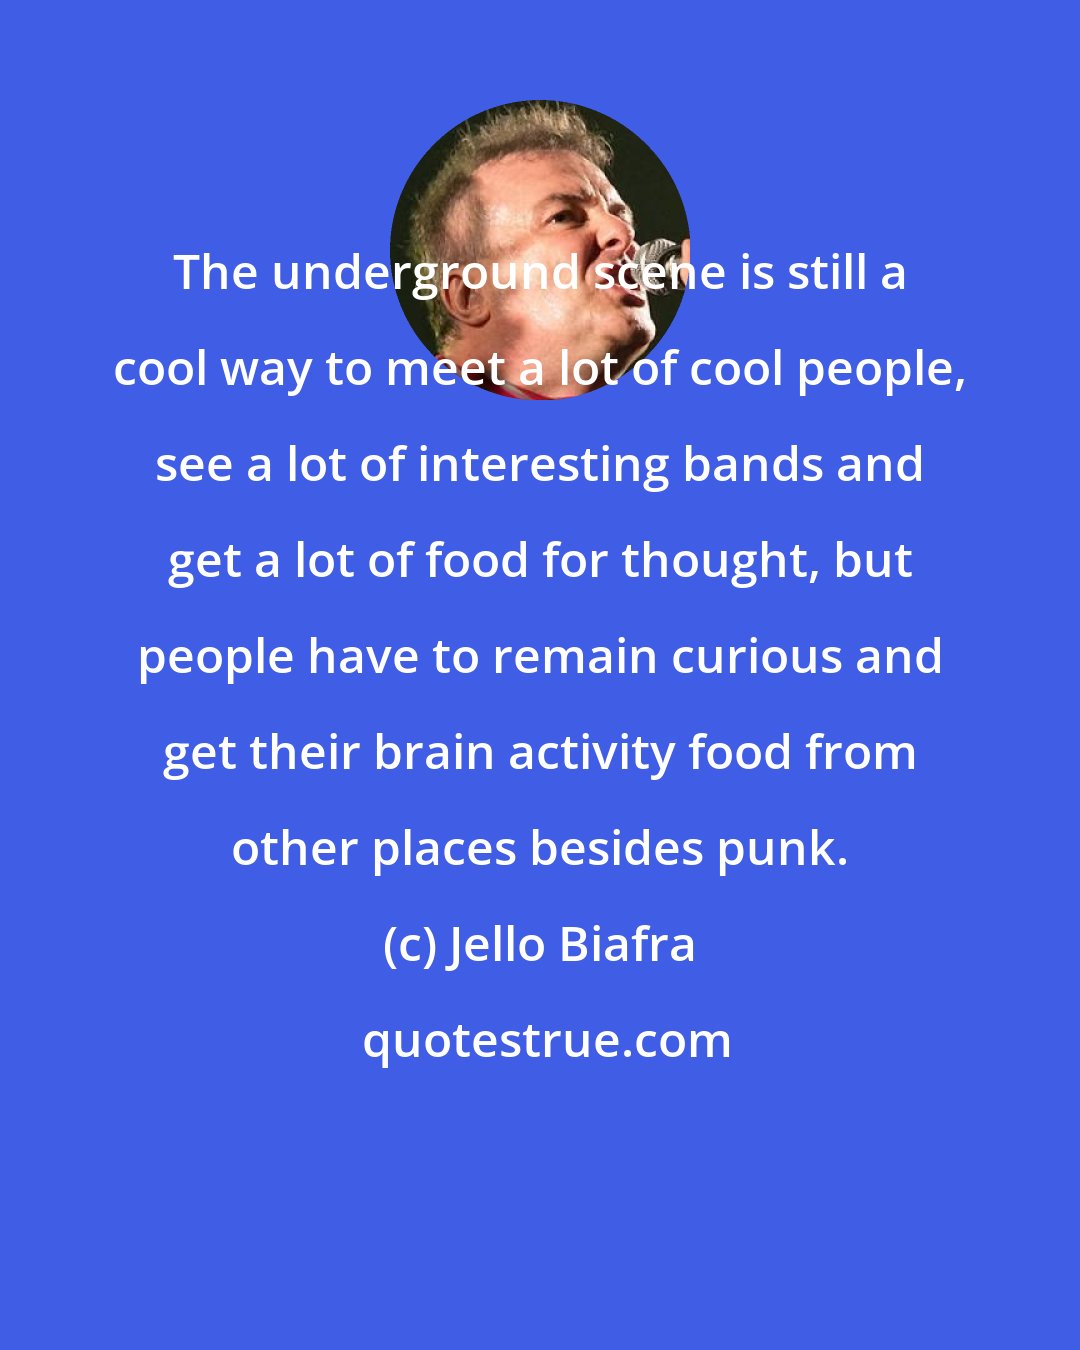 Jello Biafra: The underground scene is still a cool way to meet a lot of cool people, see a lot of interesting bands and get a lot of food for thought, but people have to remain curious and get their brain activity food from other places besides punk.